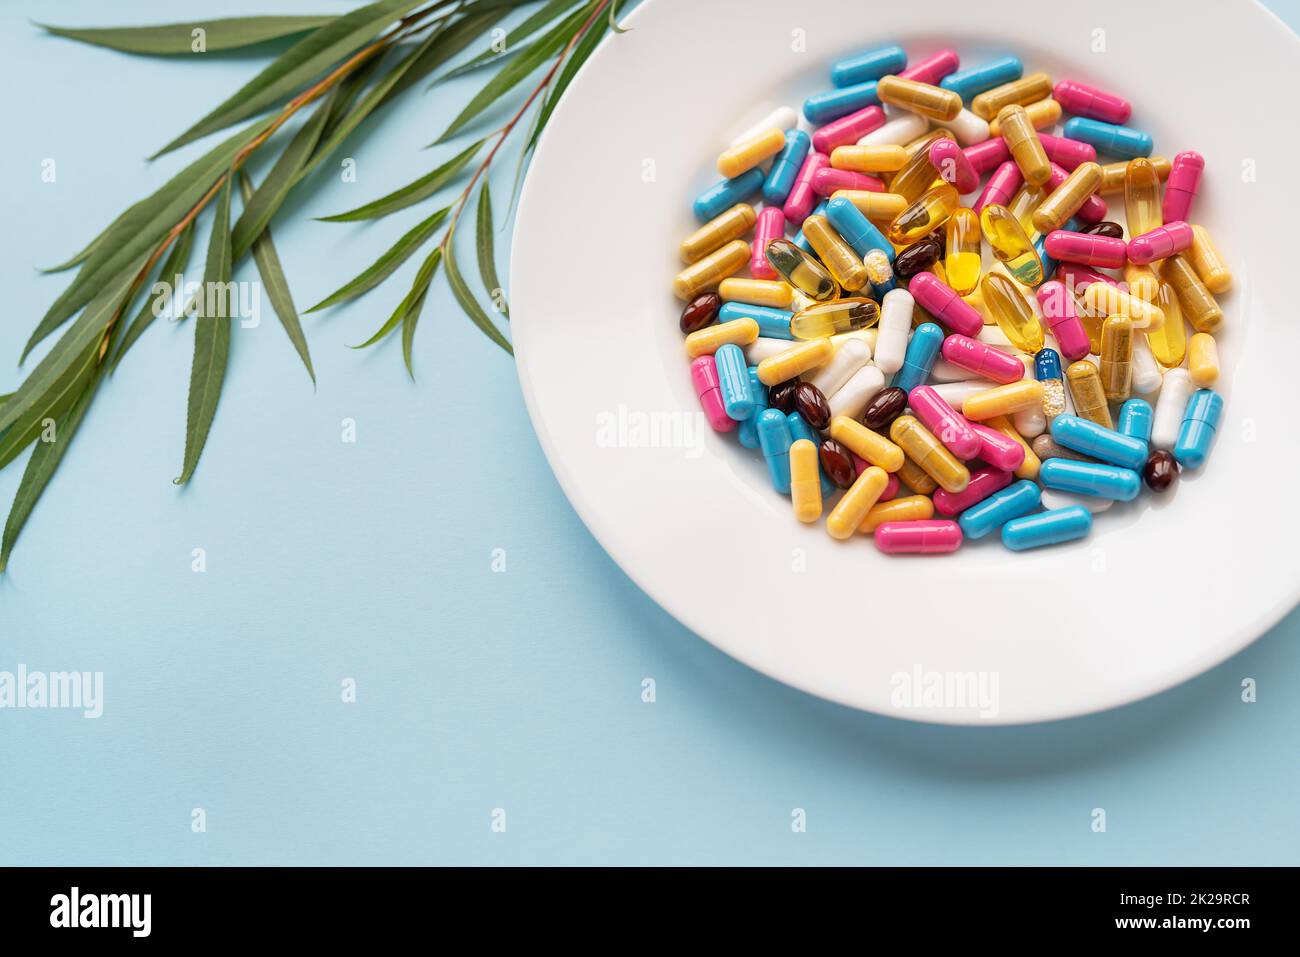 White plate with pills of nutritional supplements in different bright colors. Blue background, place for an inscription. Green branch on the background. Stock Photo